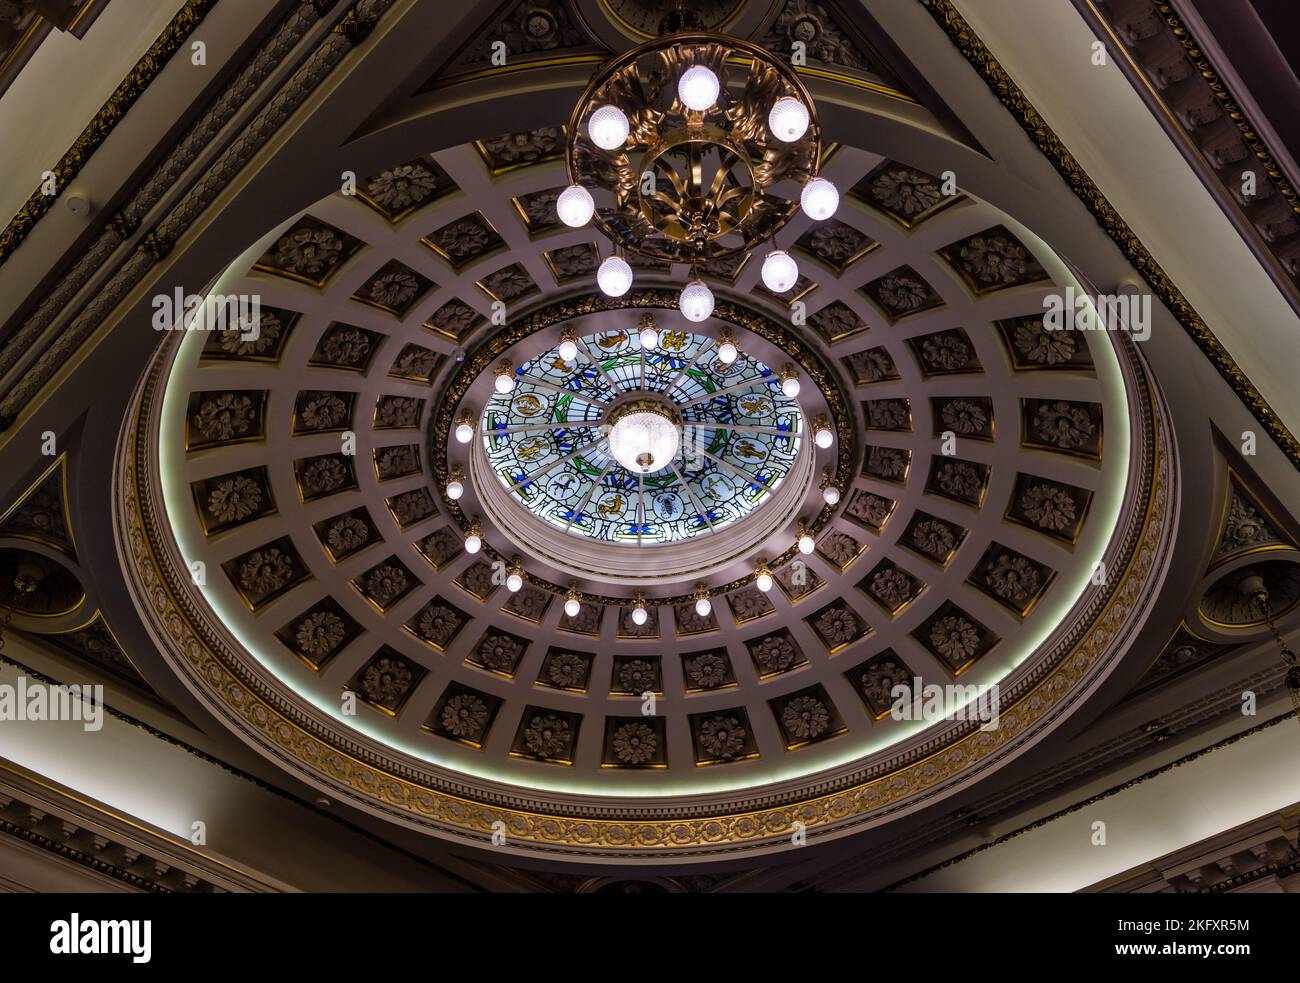 Domed ornate ceiling and lights in City Chambers council room, Edinburgh, Scotland, UK Stock Photo